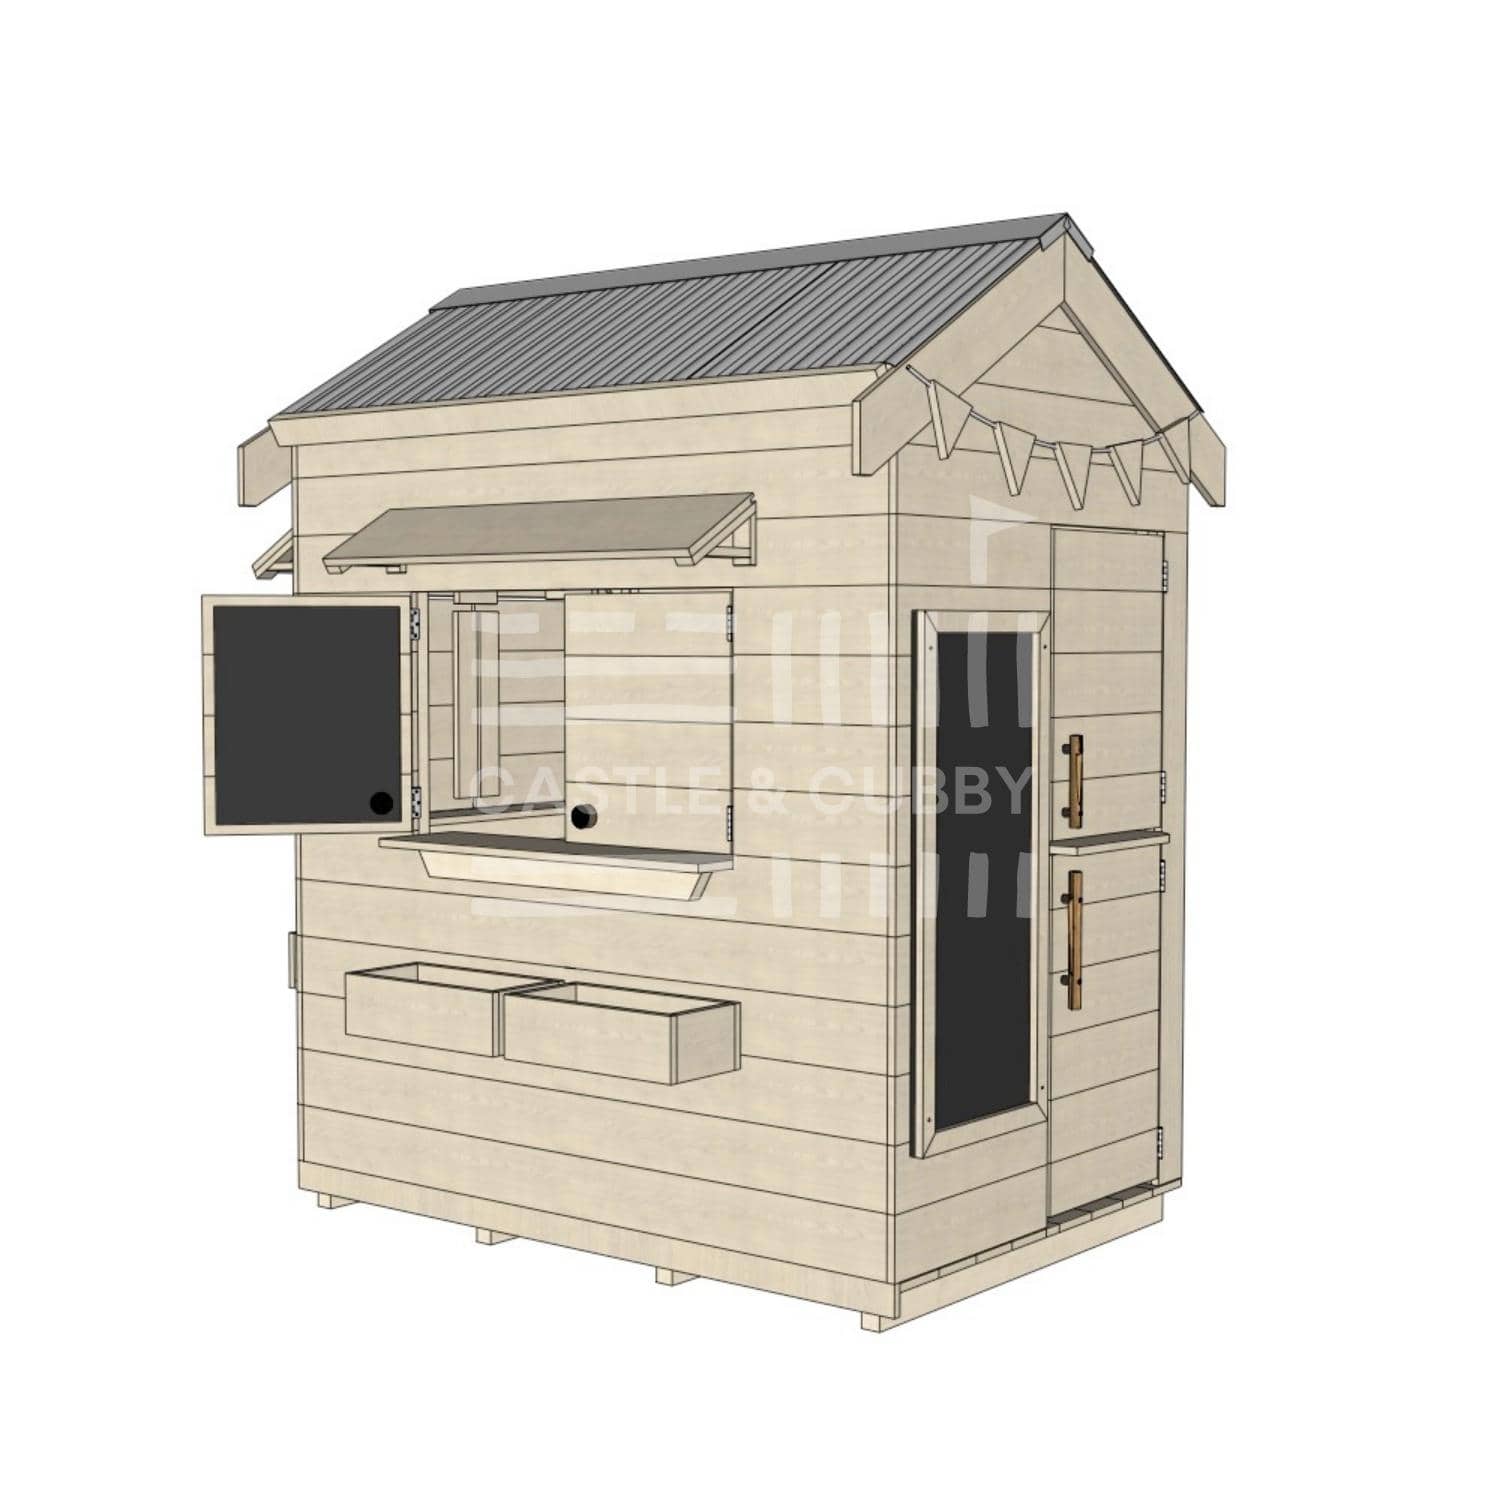 Pitched roof extra height raw wooden cubby house residential and family homes little rectangle accessories